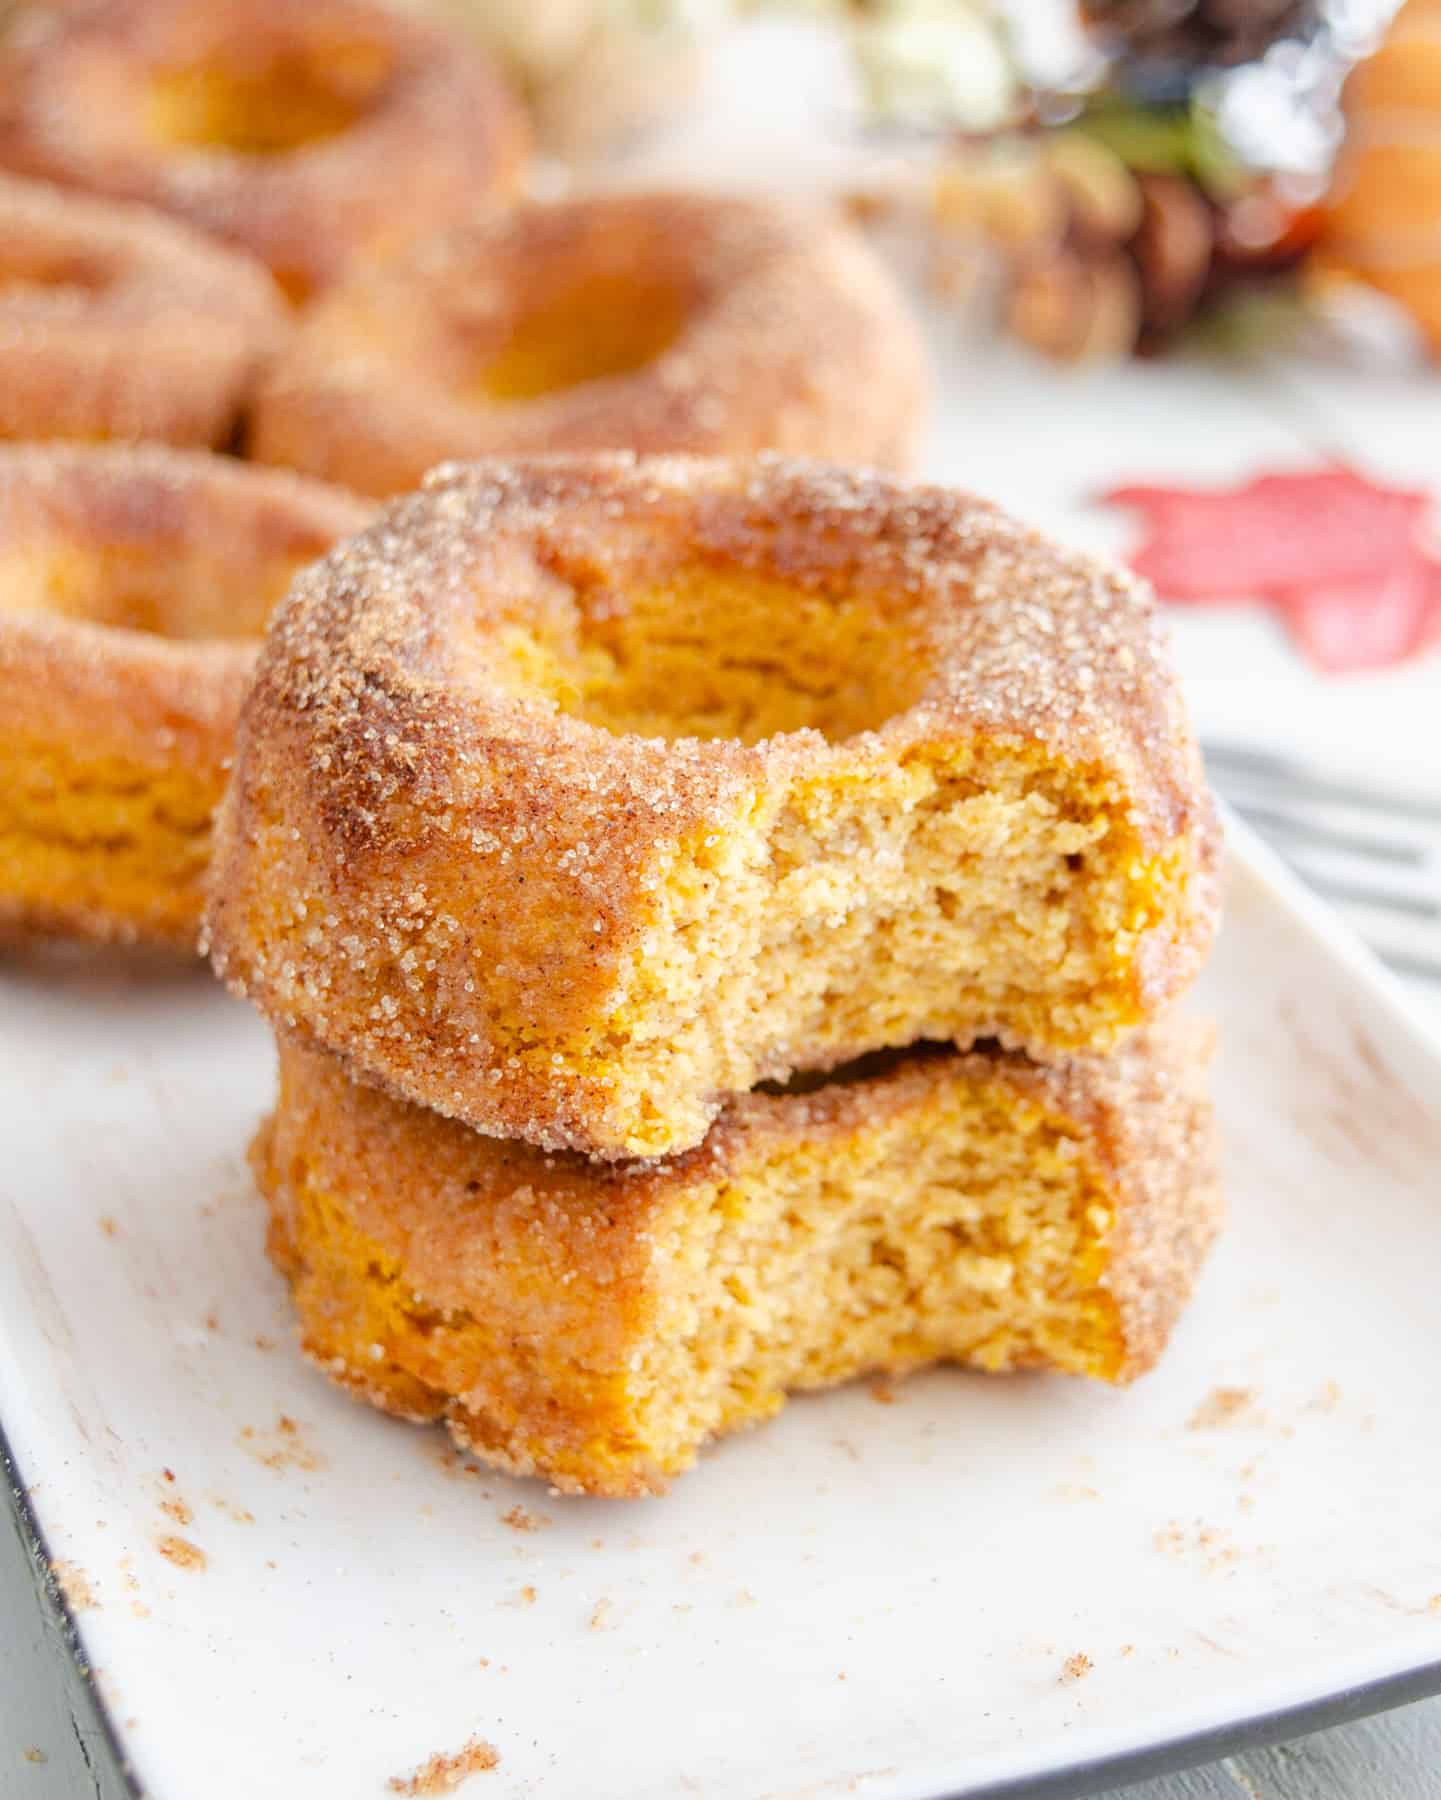 A stack of baked low carb pumpkin spice donuts with a bite out of them showing the cakey interior.